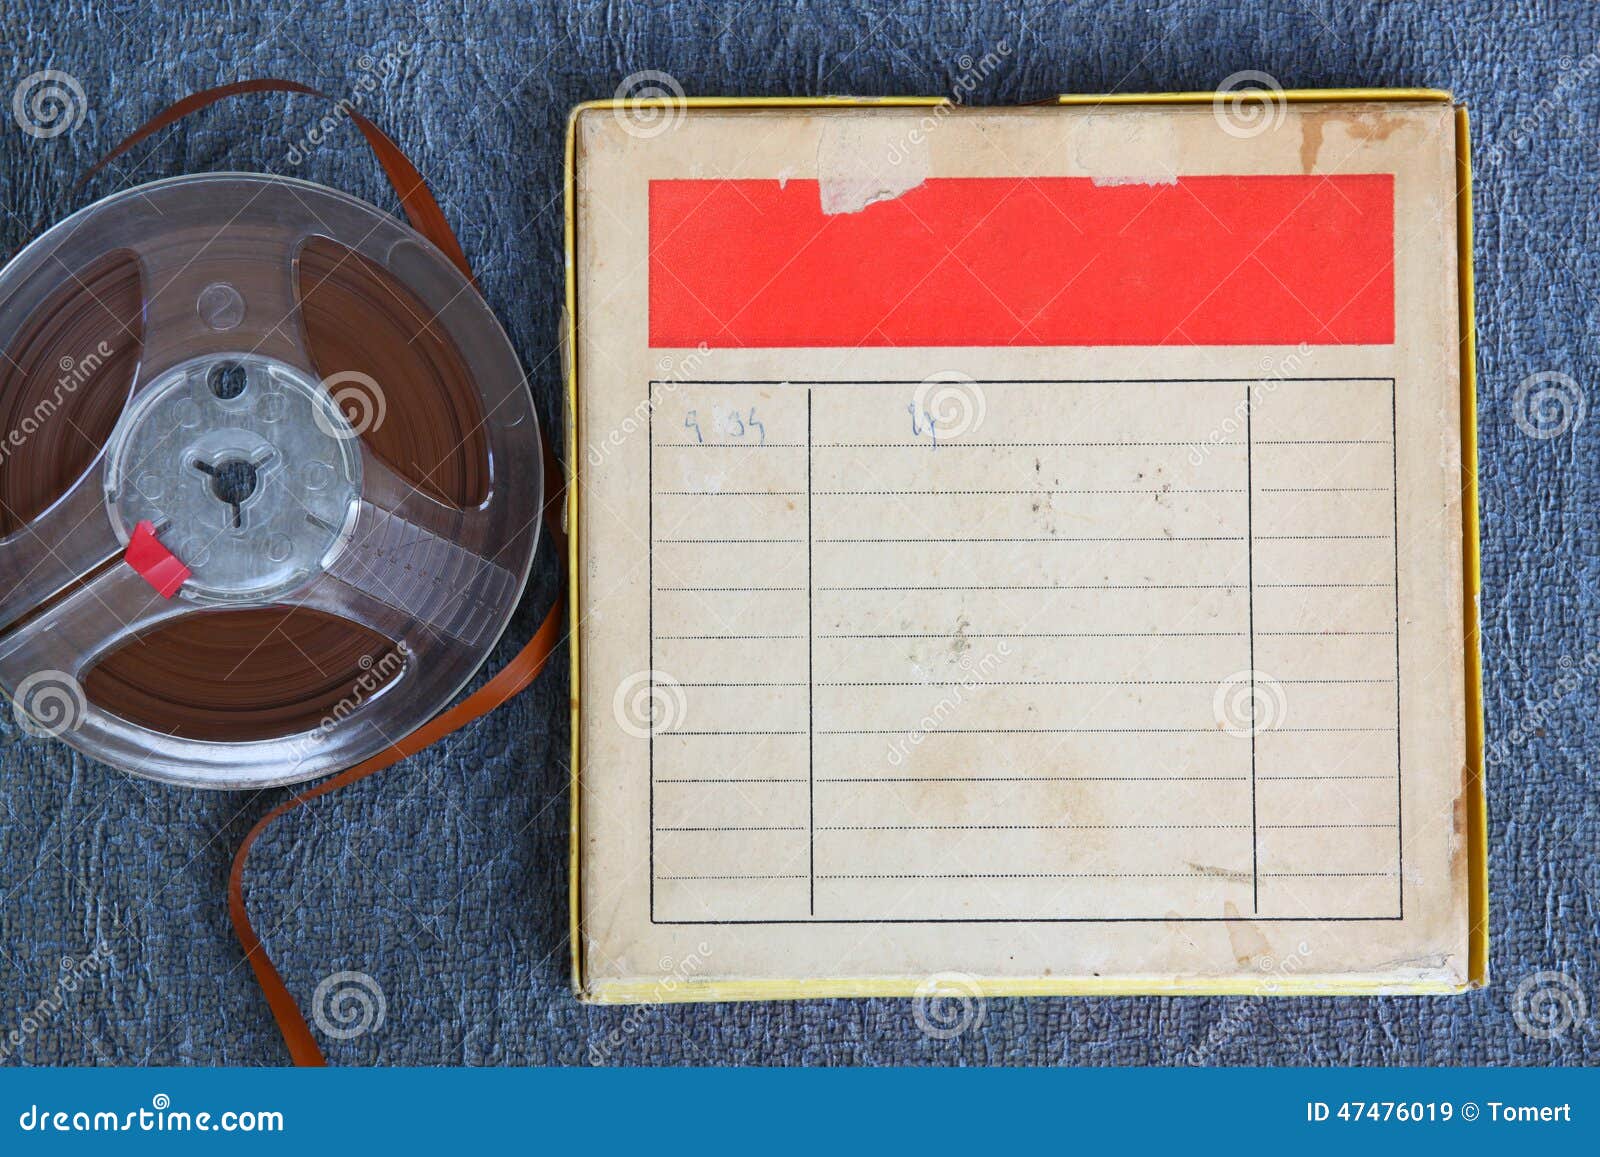 https://thumbs.dreamstime.com/z/top-view-old-sound-recording-tape-reel-to-reel-type-box-room-text-filtered-image-47476019.jpg